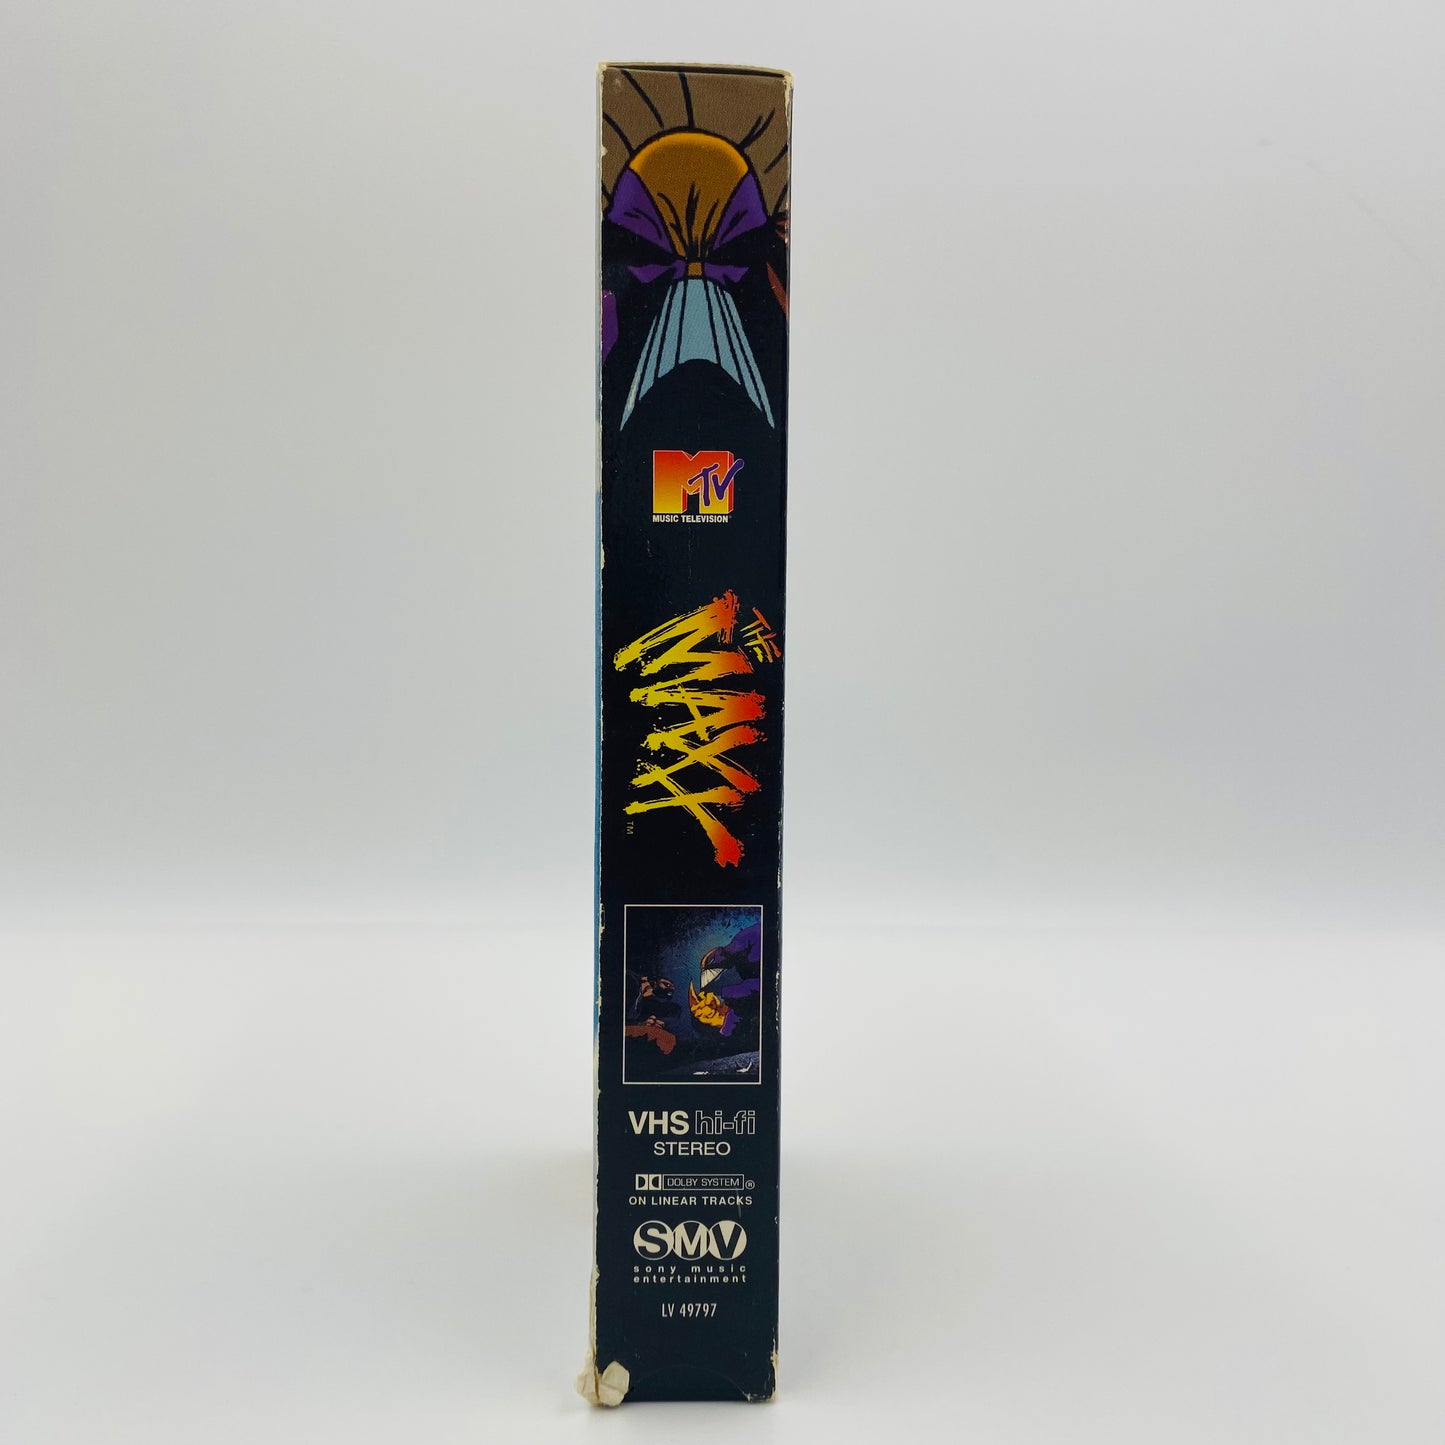 The Maxx VHS tape (1996) Sony Music Entertainment